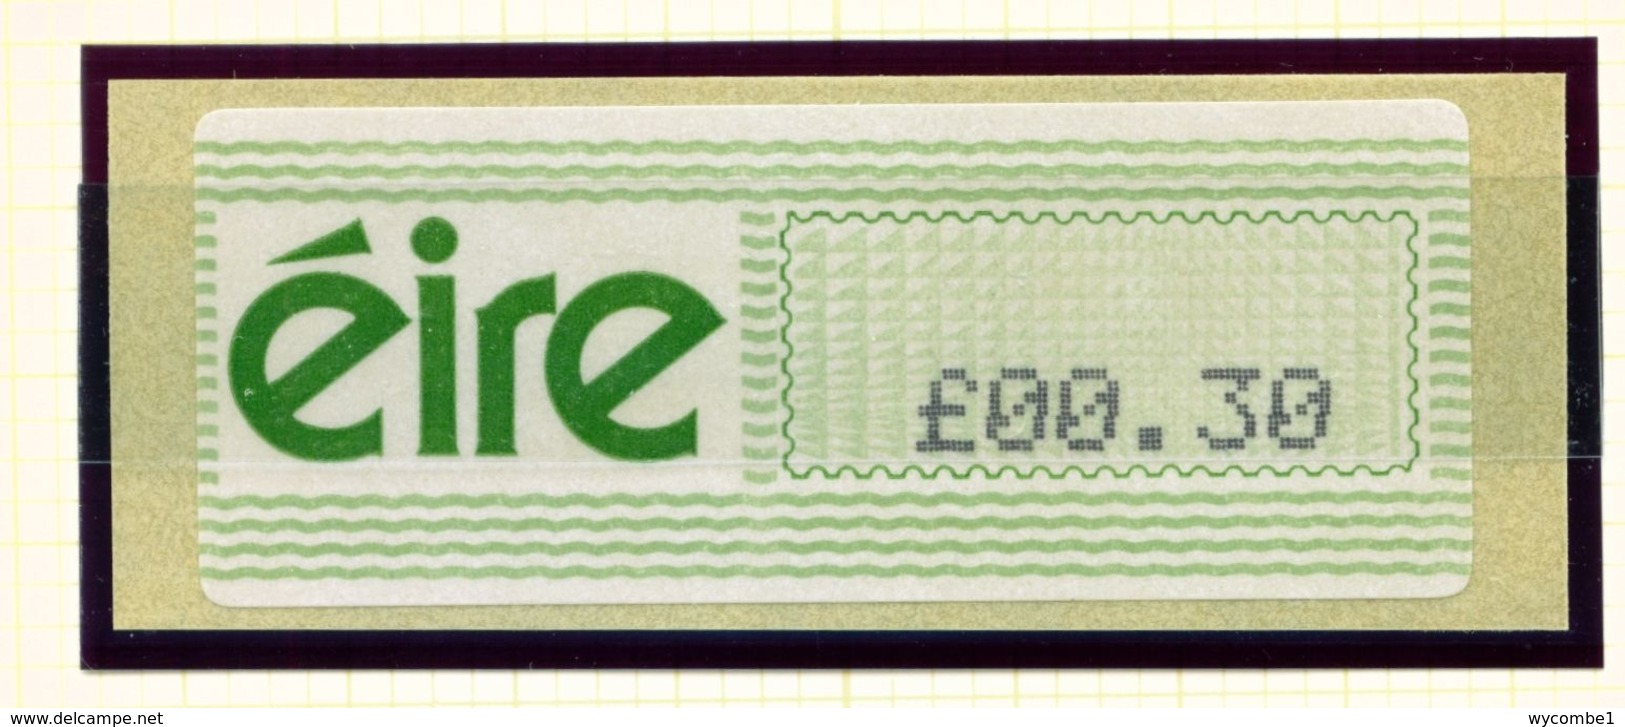 IRELAND  -  1990-1 Amiel Pitney Bowes Label 30p Unmounted/Never Hinged Mint - Franking Labels